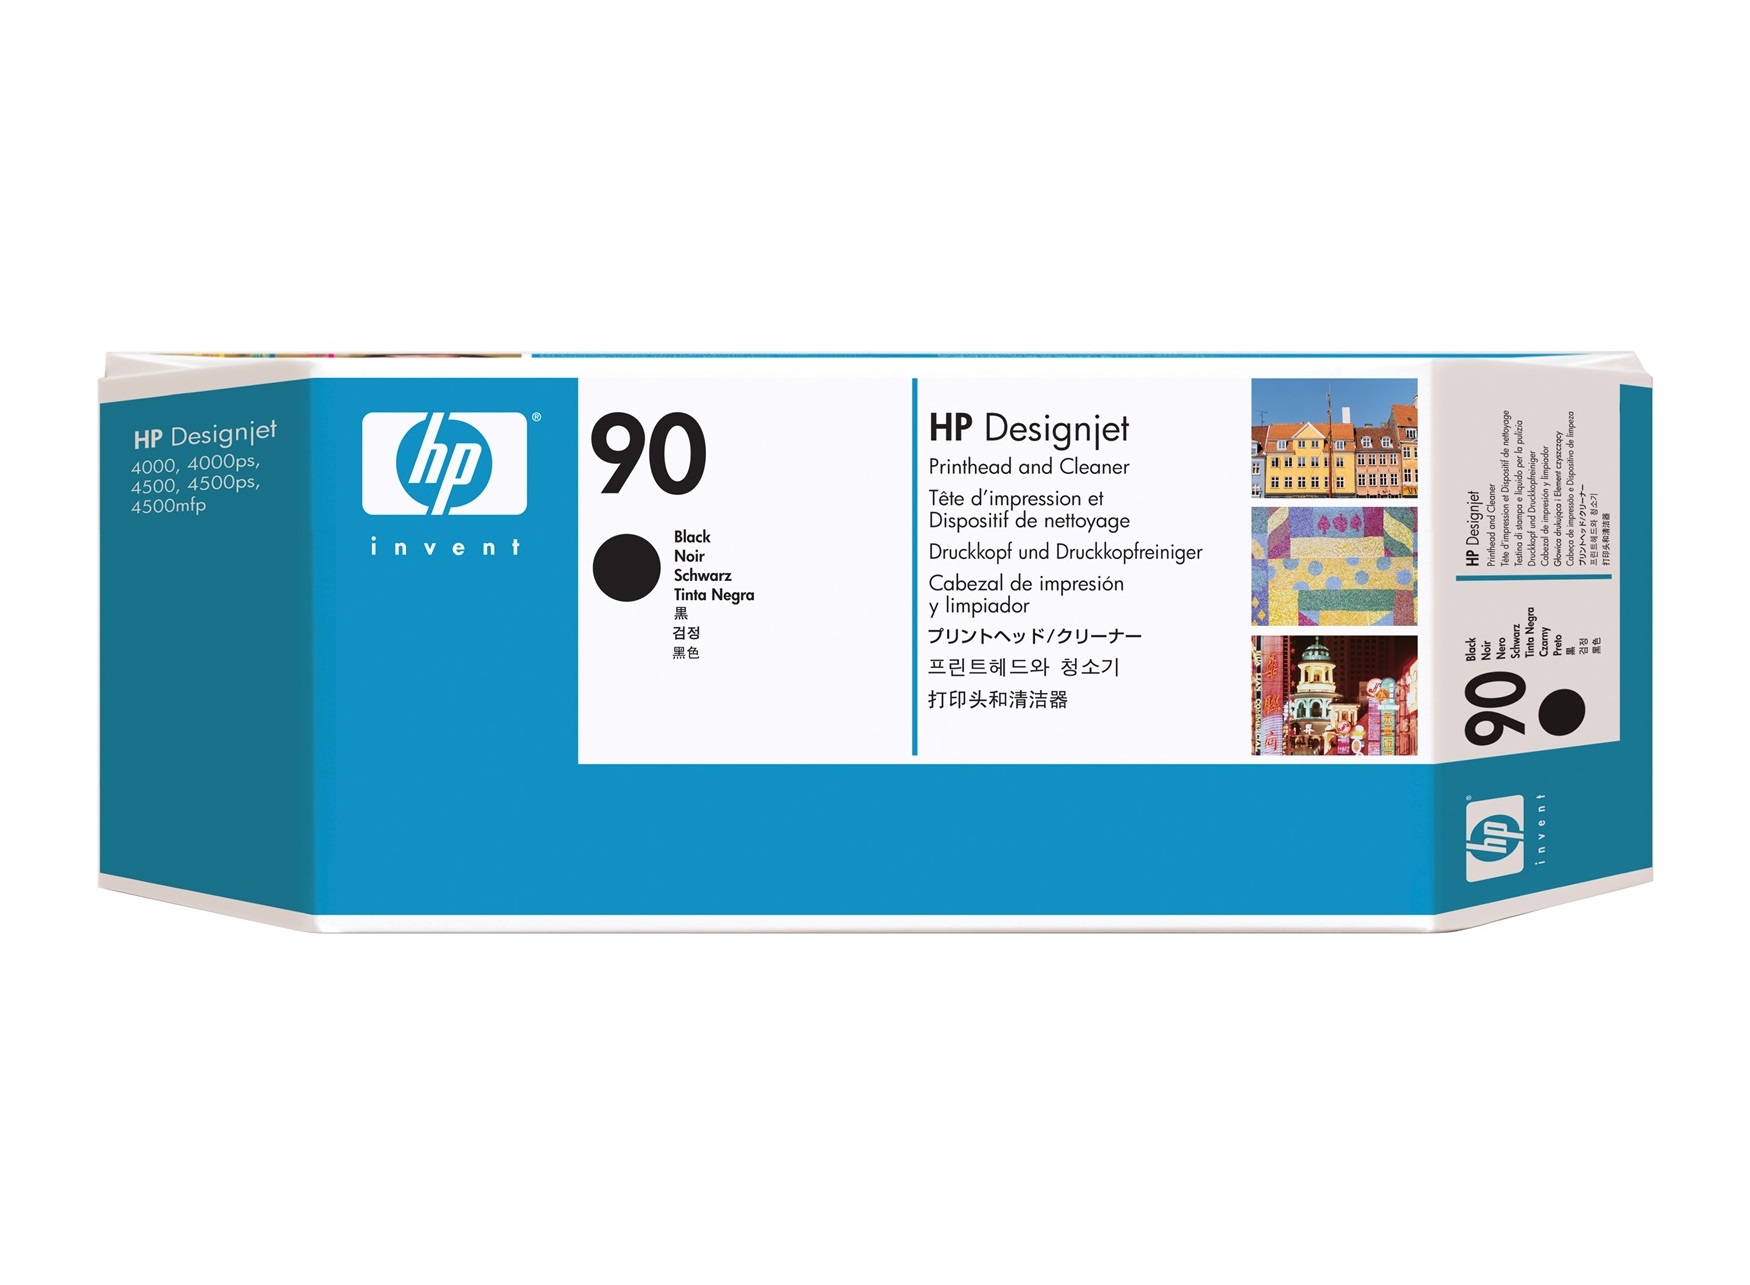 Related to HP DESIGNJET 4000: C5054A